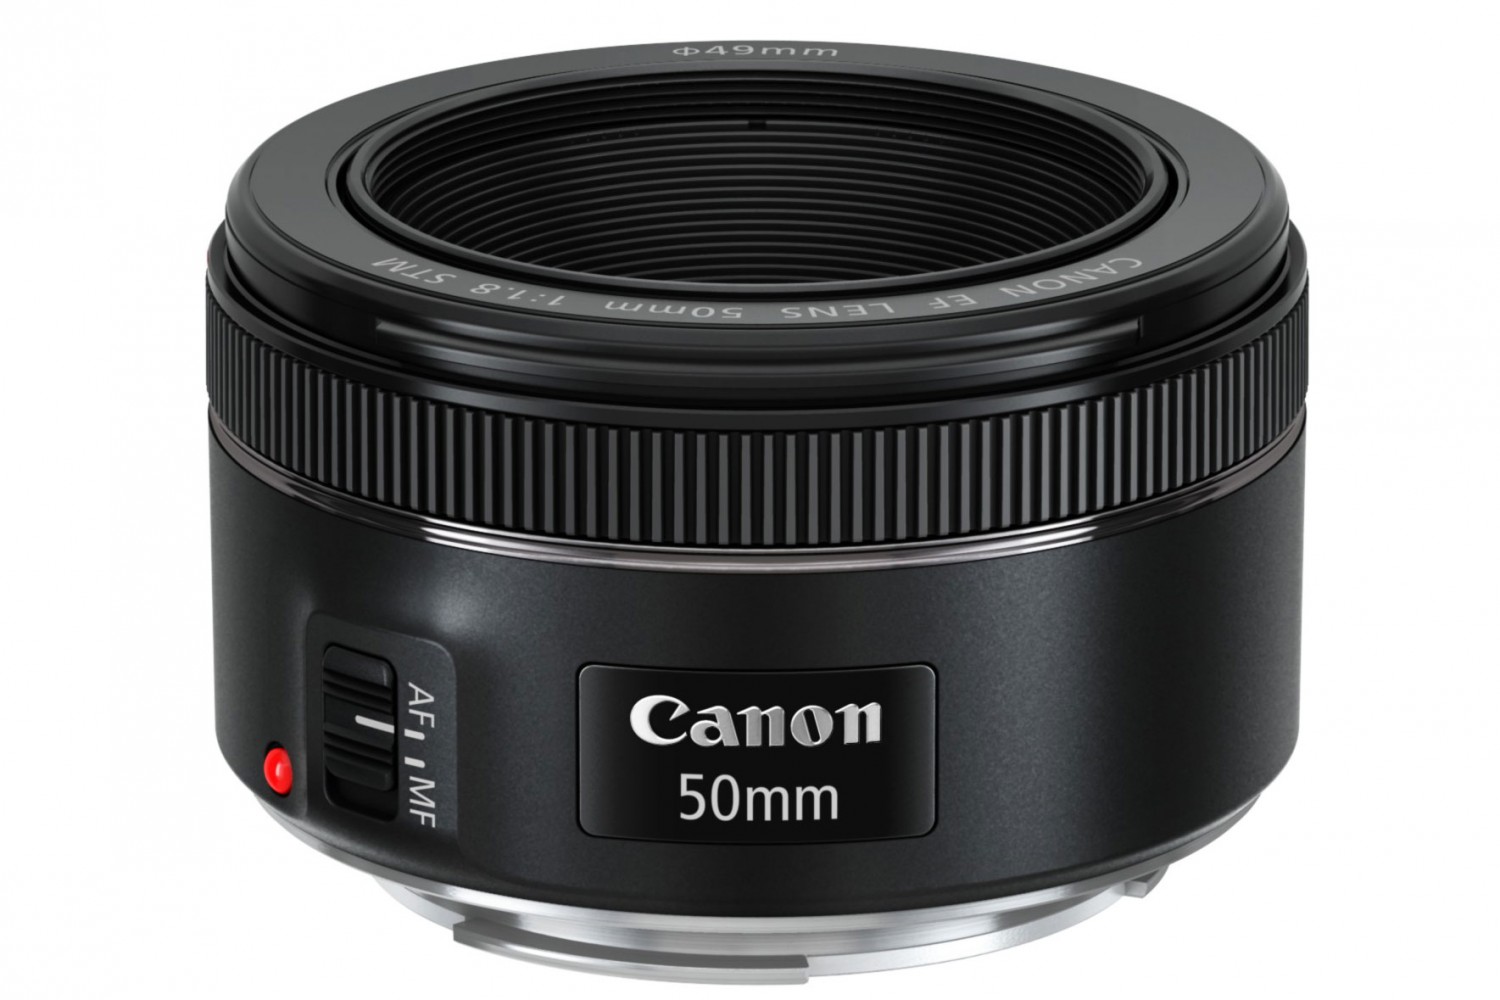 Canon Reveals All New, Sturdier 'Nifty Fifty' 50mm f/1.8 Lens